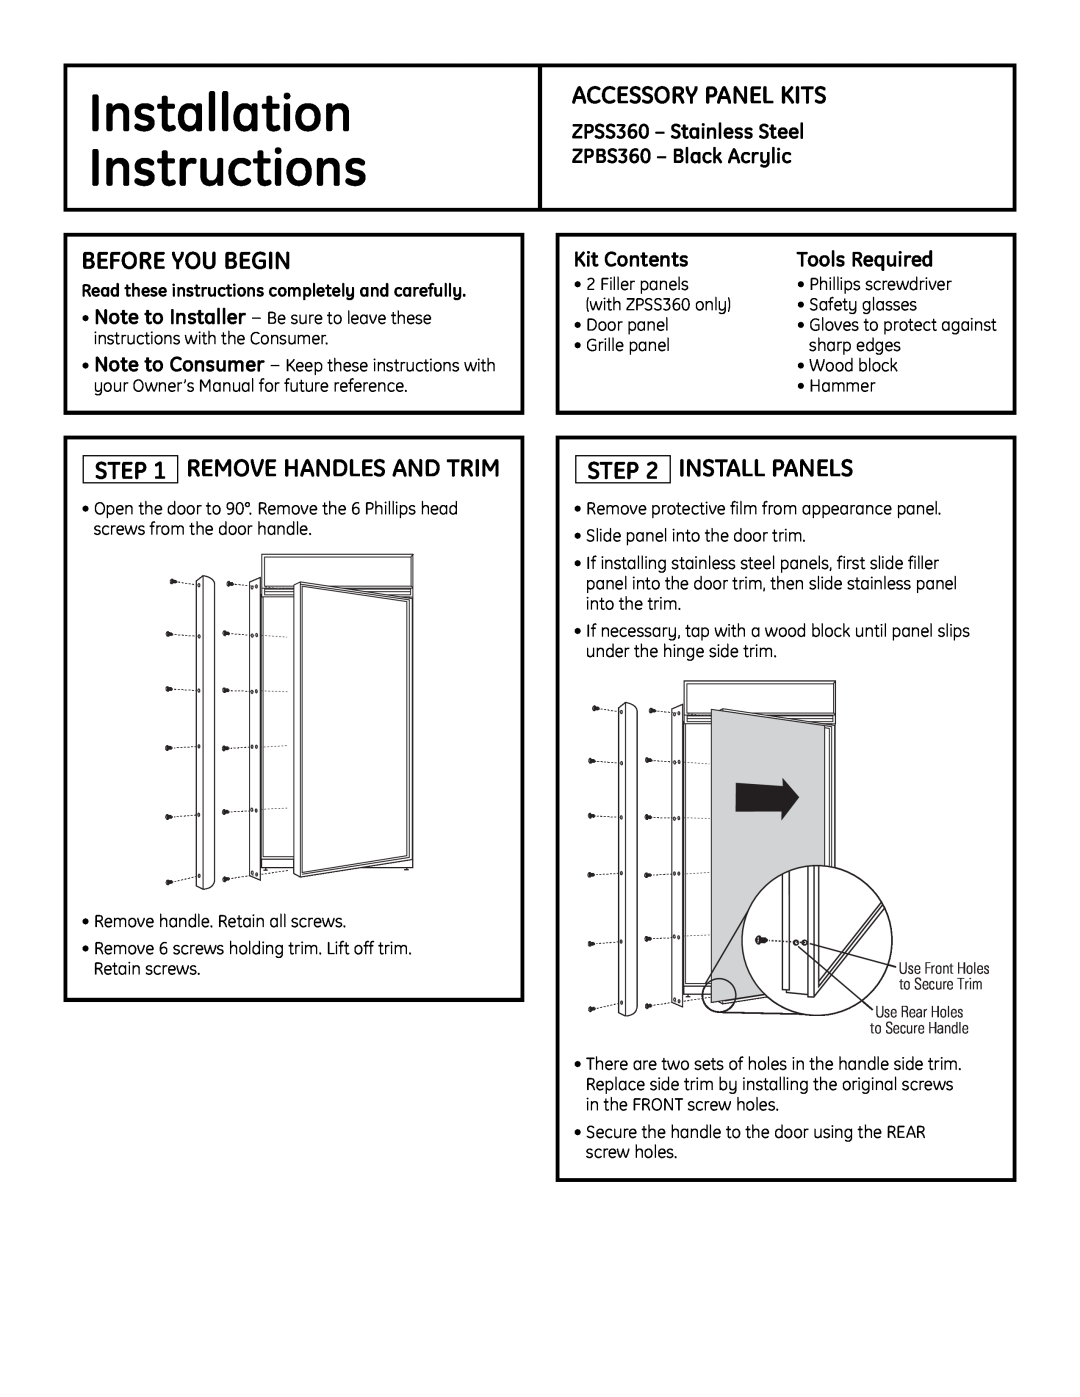 GE ZPBS360 installation instructions Accessory Panel Kits, Before You Begin, Remove Handles And Trim, Install Panels 